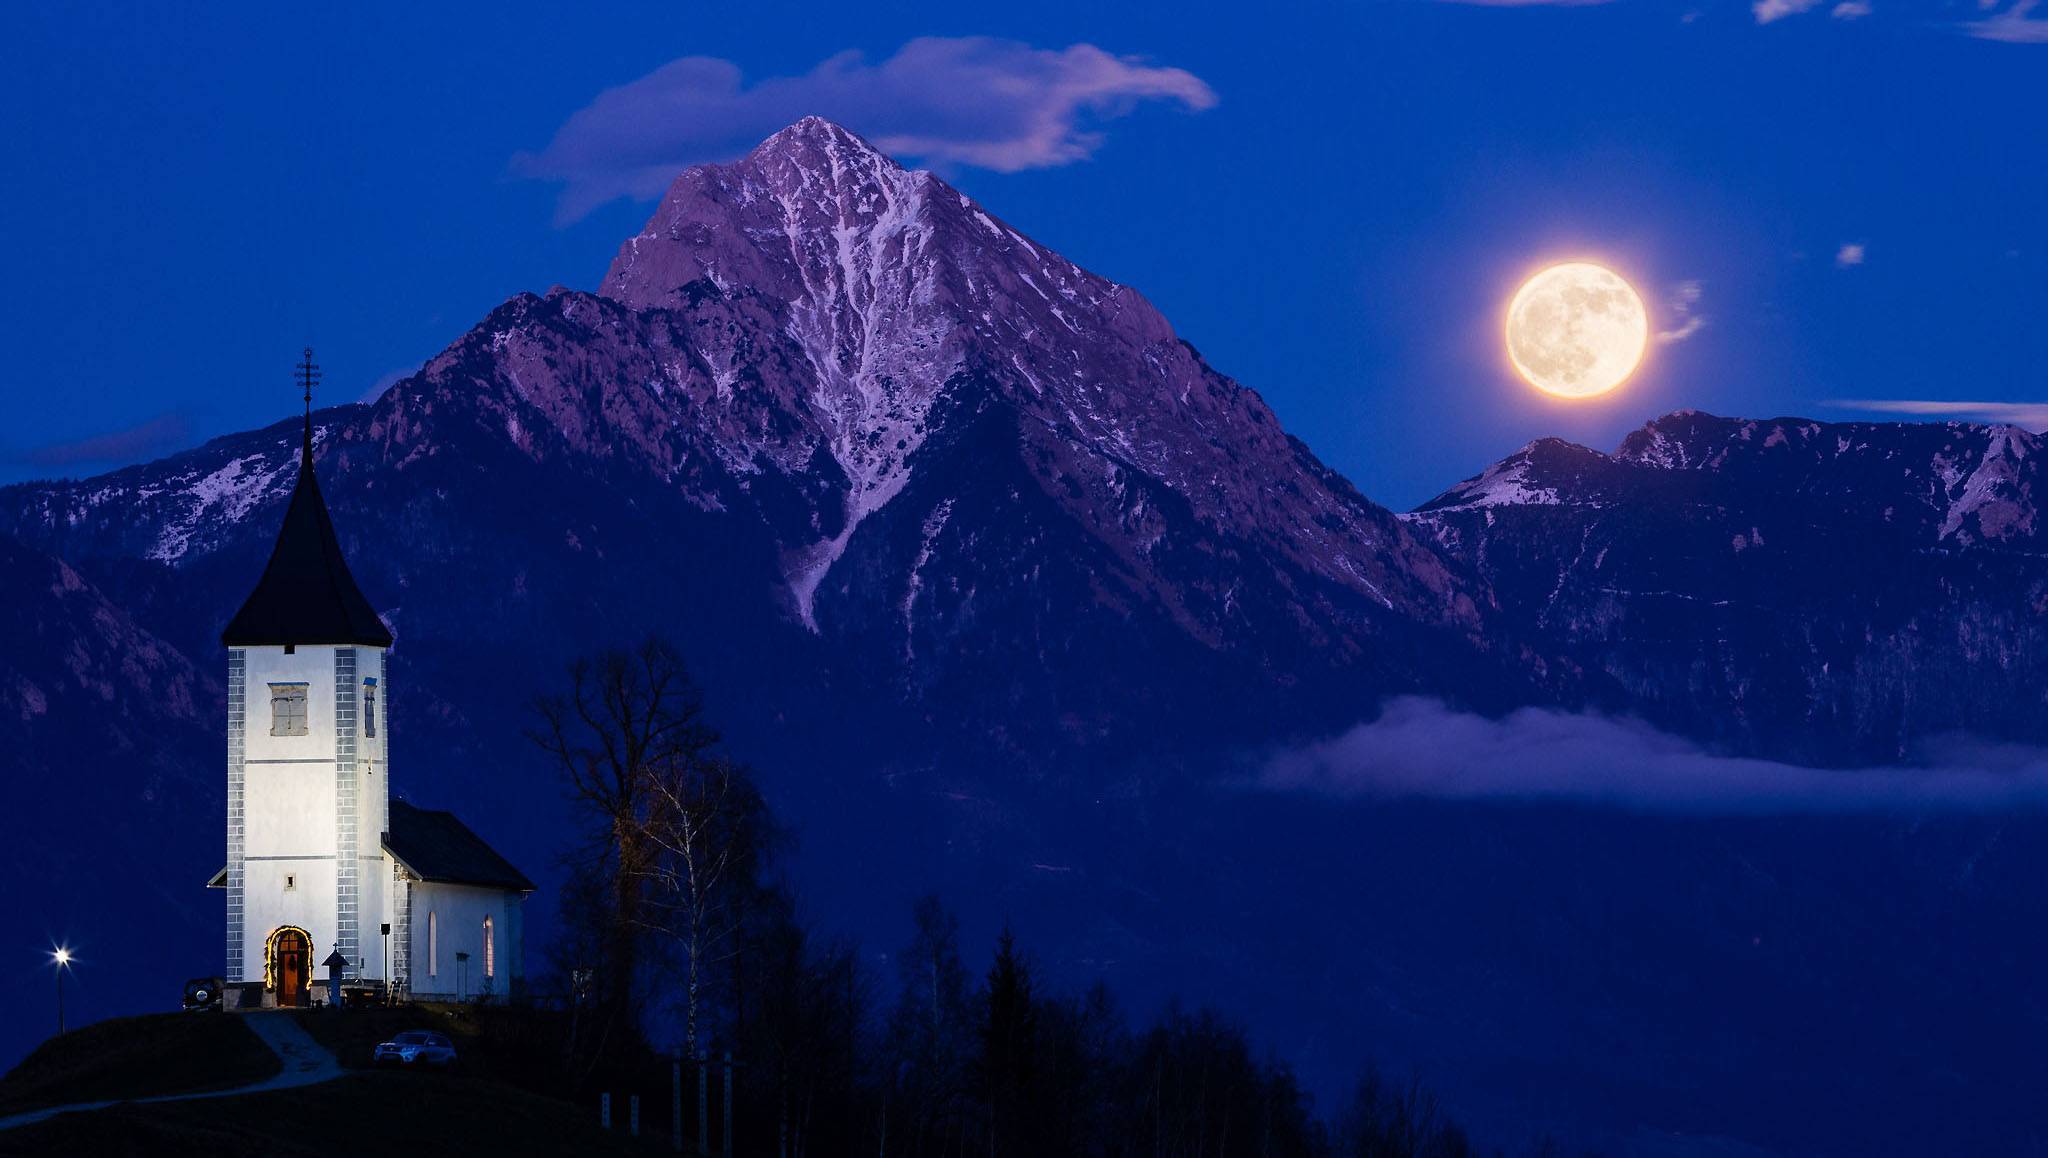 Full moon rising at dusk over Jamnik church of Saints Primus and Felician, perched on a hill on the Jelovica Plateau with the kamnik alps and Storzic mountain in the background, Slovenia.